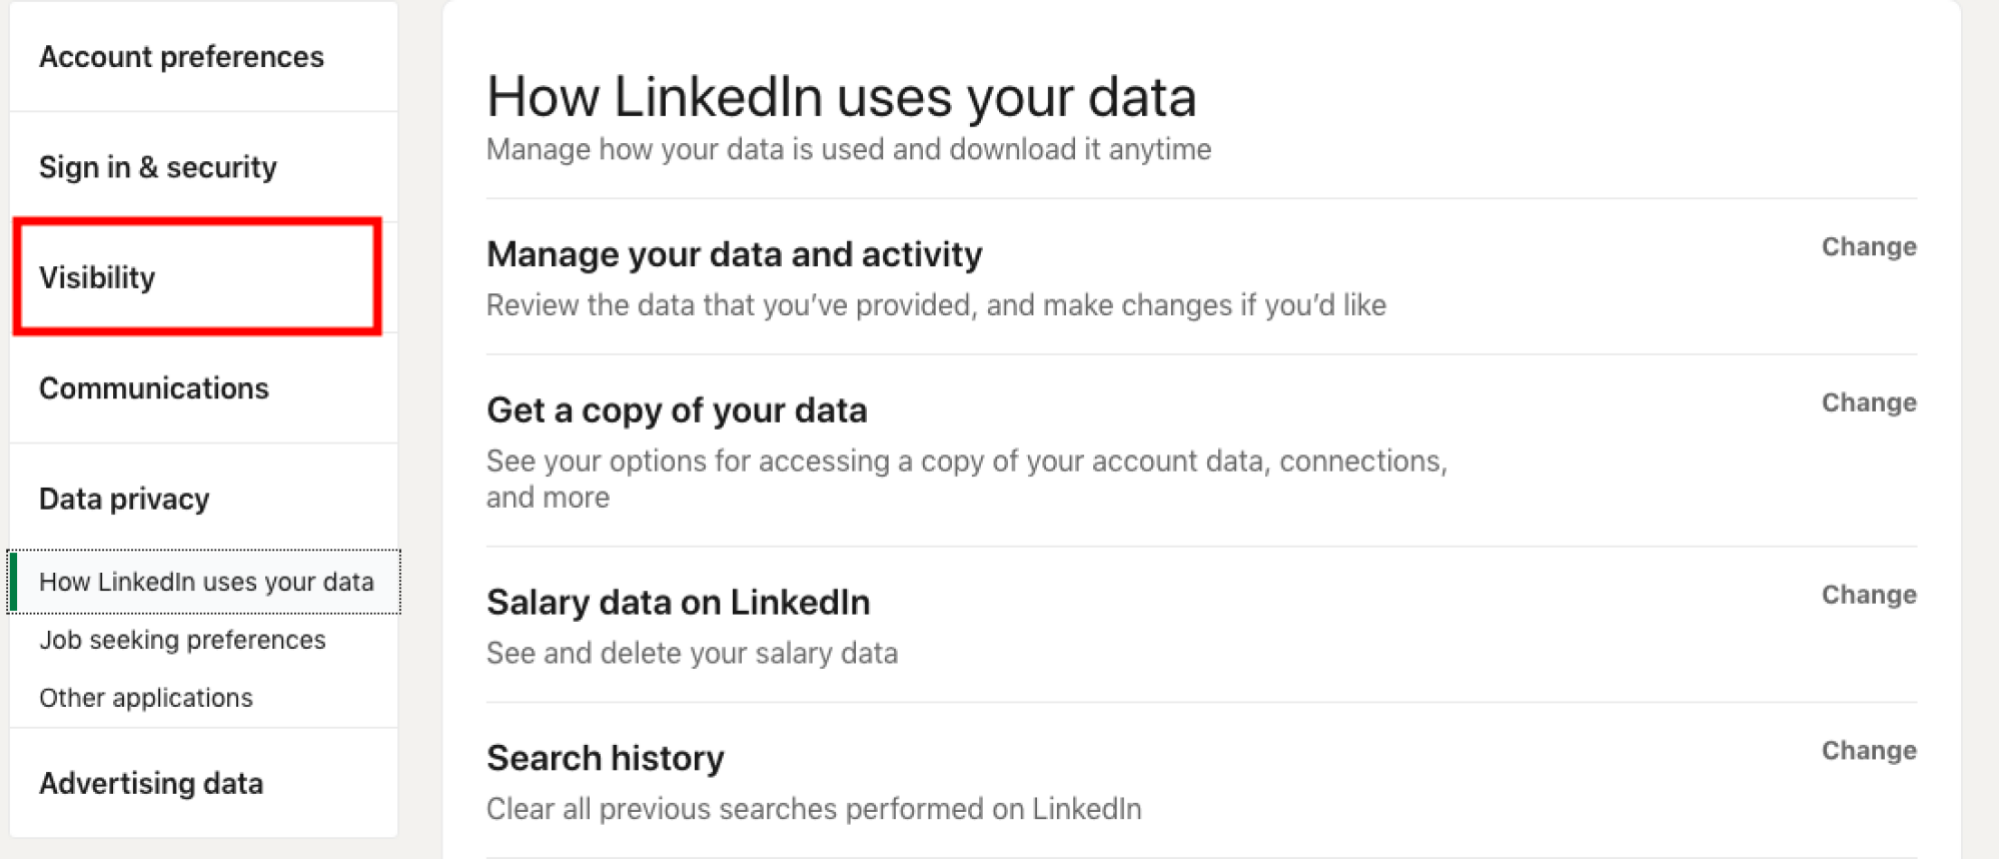 Screenshot of the LinkedIn "Account preferences" menu with "Visibility" highlighted.  